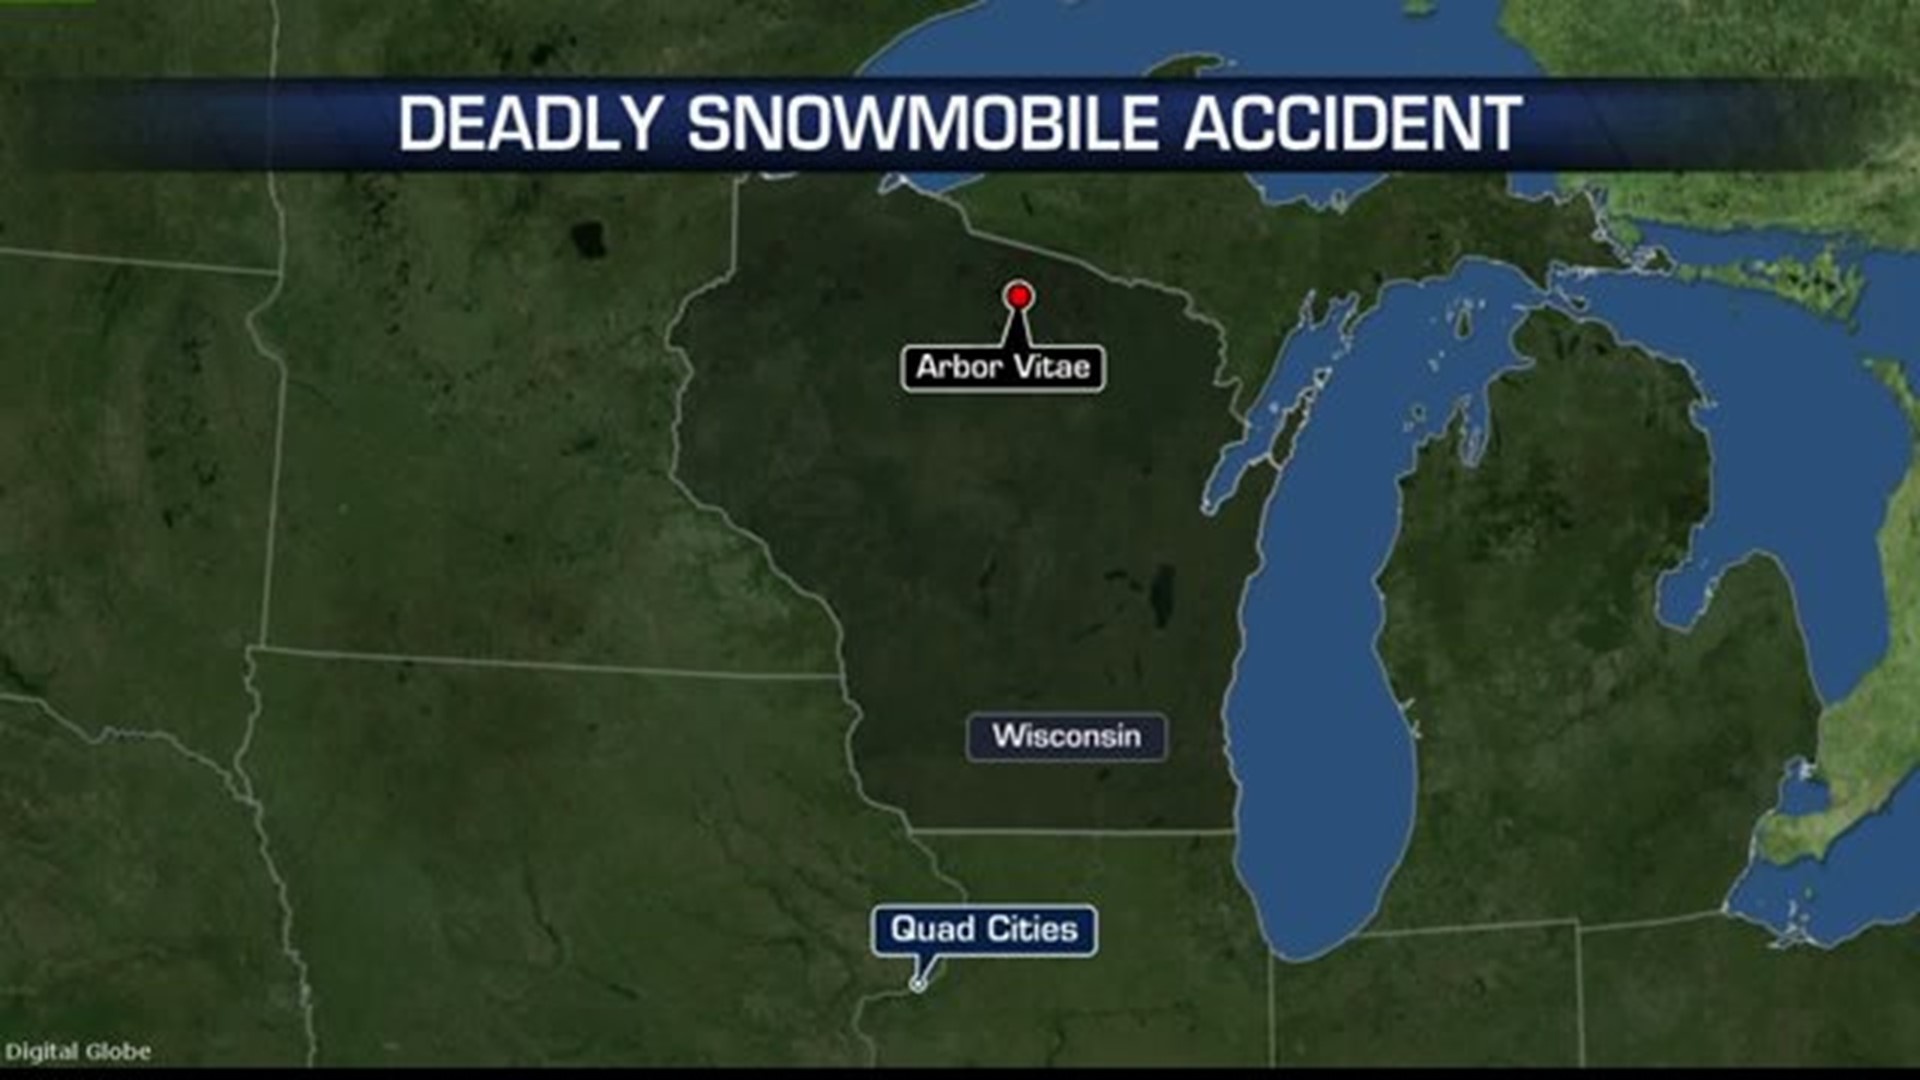 East Moline man killed in snowmobile accident